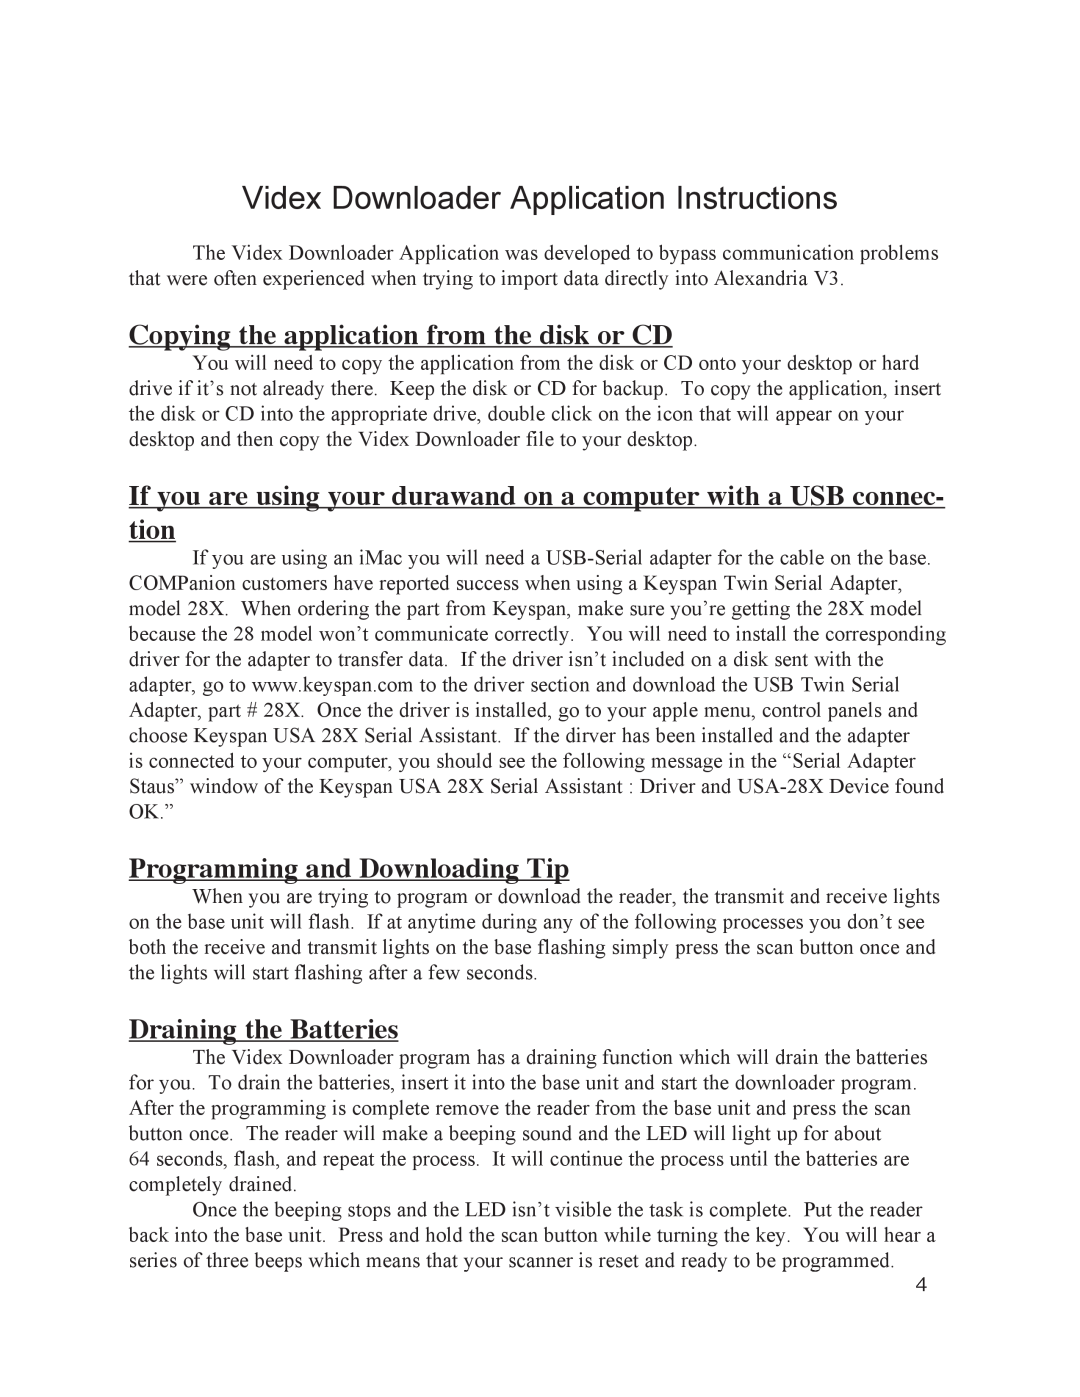 Keyspan DuraWand Portable Scanner Videx Downloader Application Instructions, Copying the application from the disk or CD 